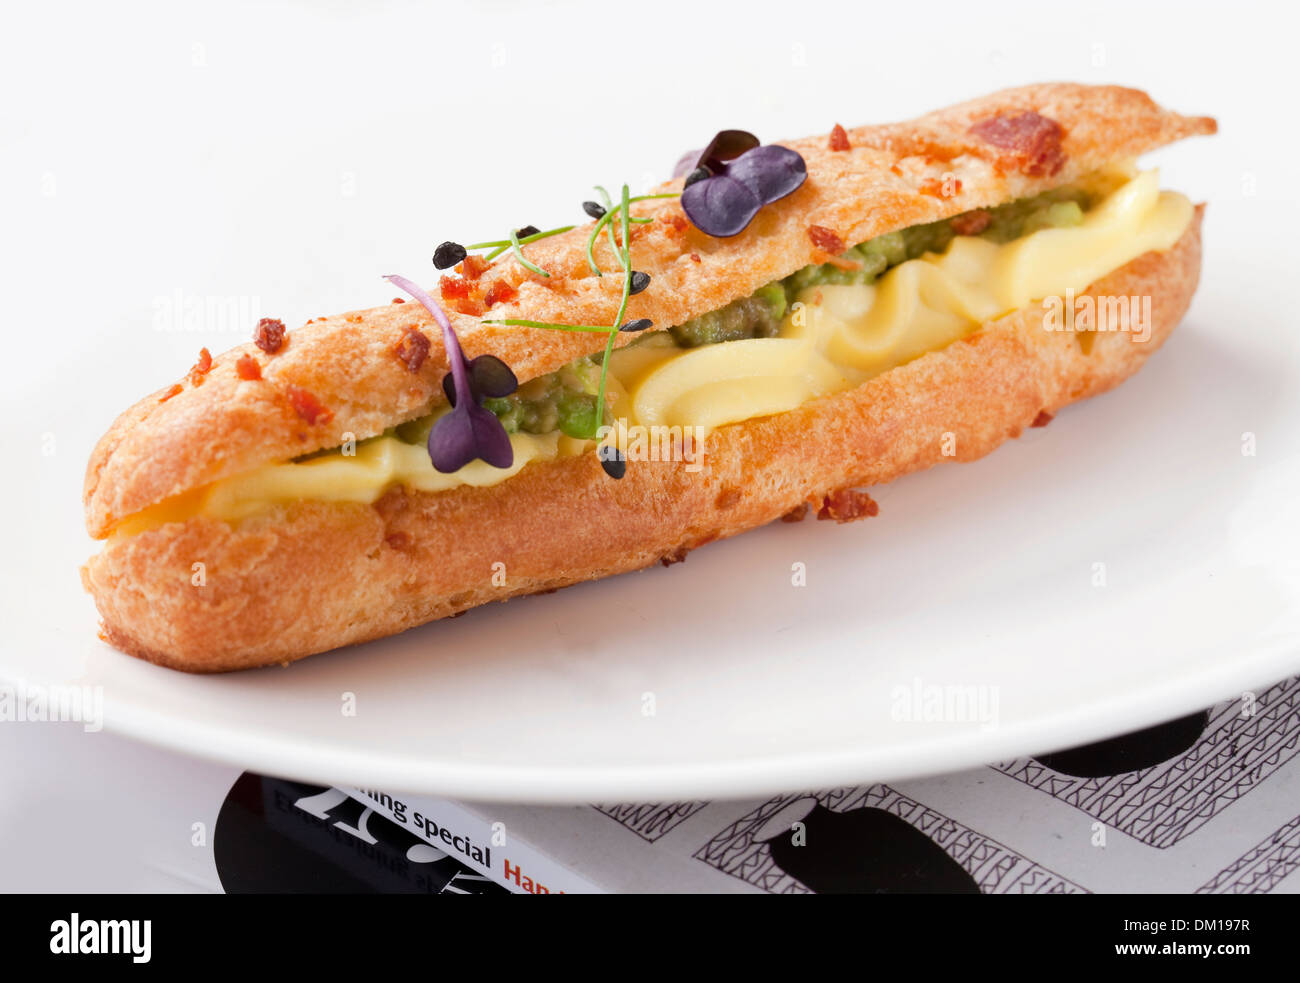 Devilled egg and avocado eclair Stock Photo